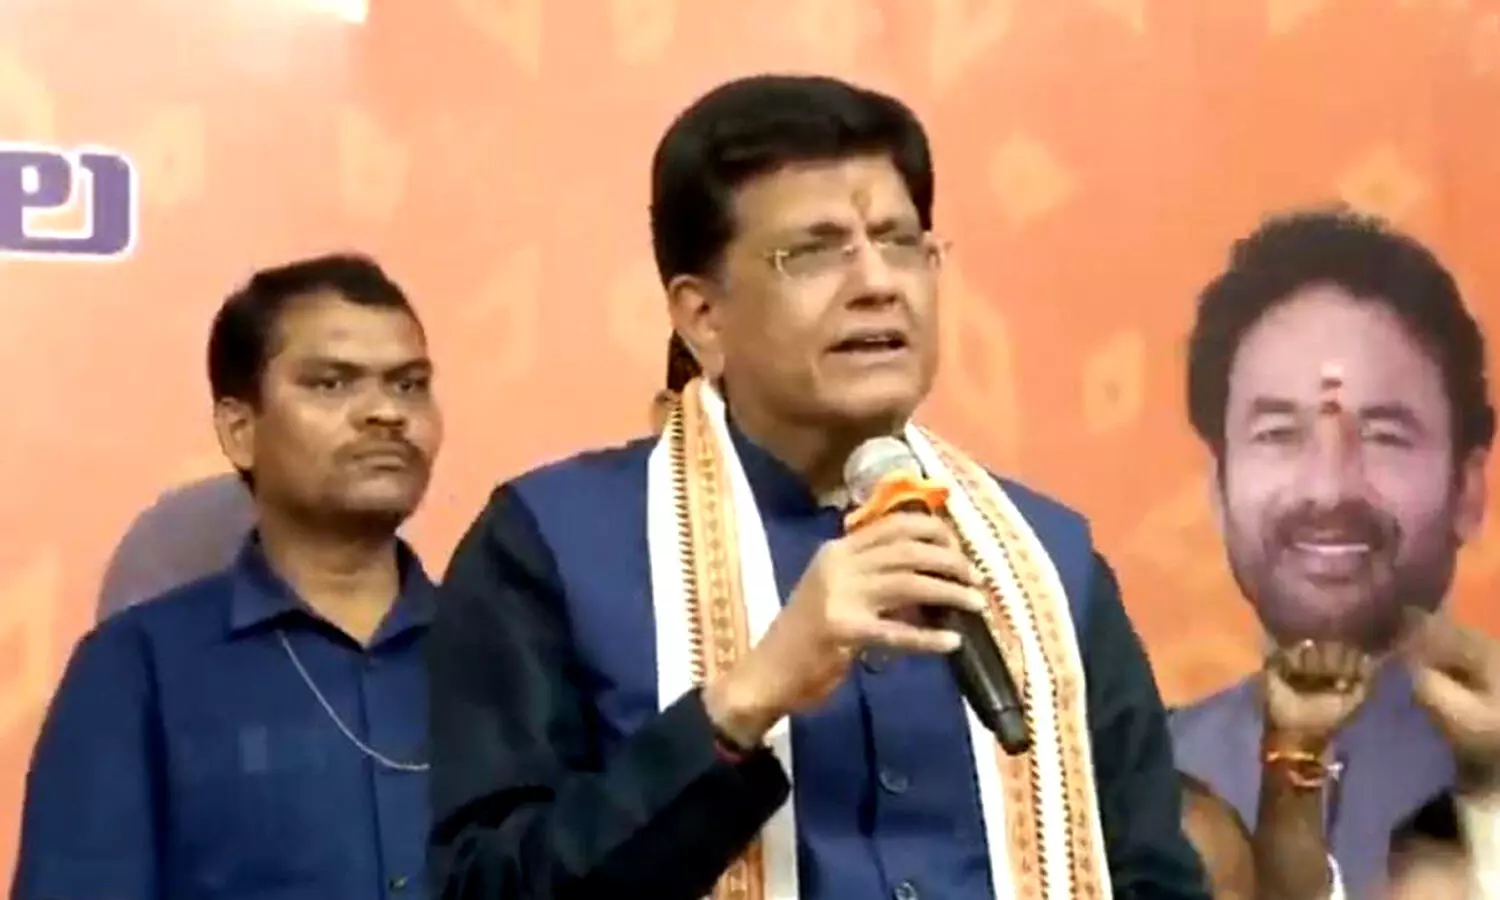 BJP will travel across Telangana to educate voters about corrupt KCR, KTR: Piyush Goyal